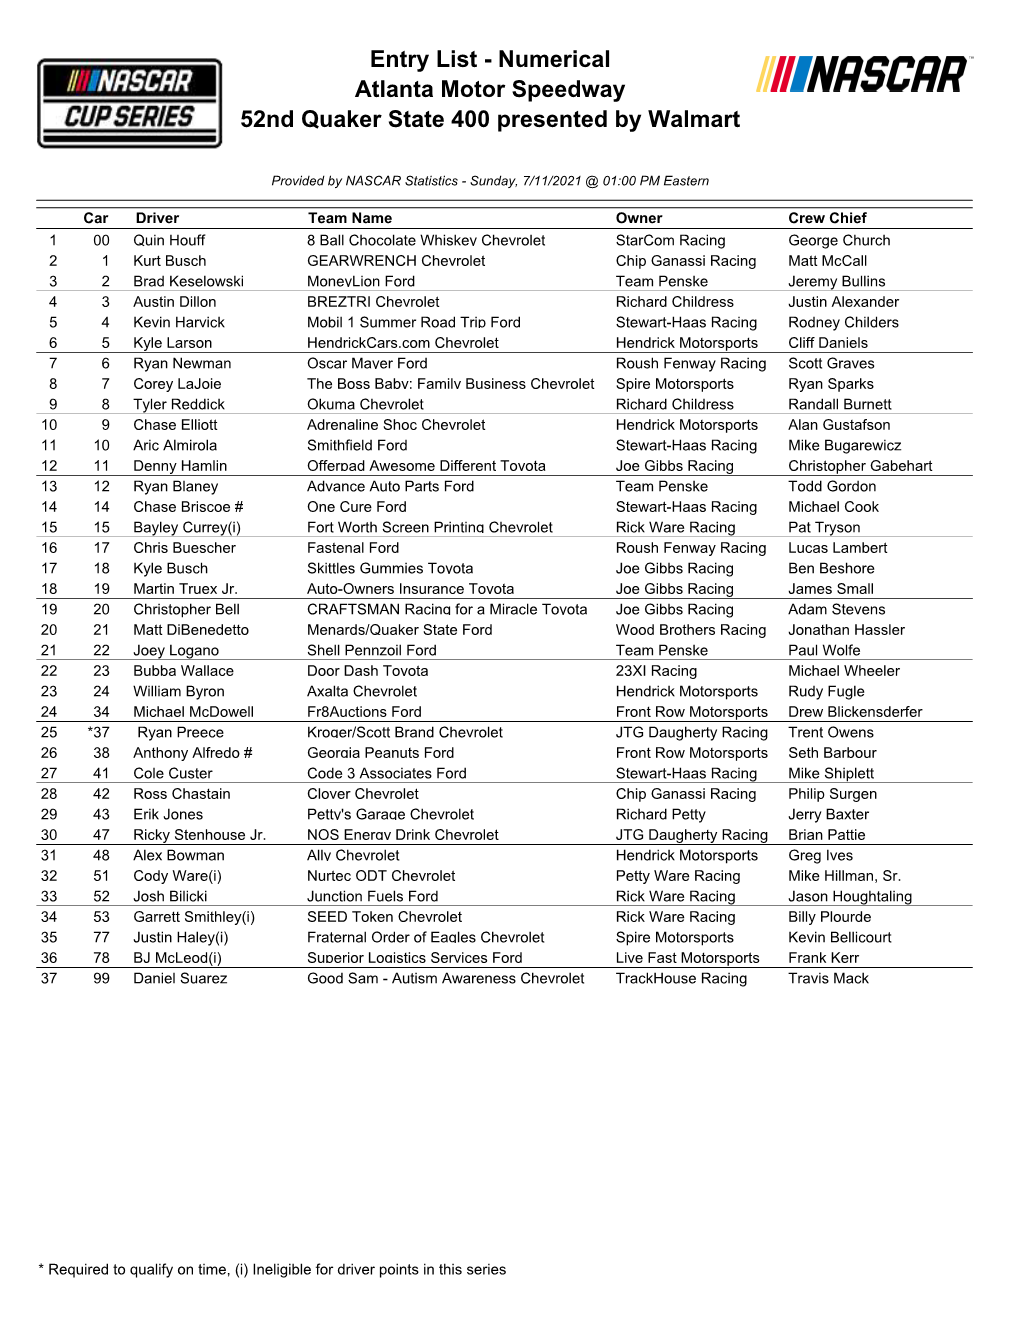 Entry List - Numerical Atlanta Motor Speedway 52Nd Quaker State 400 Presented by Walmart